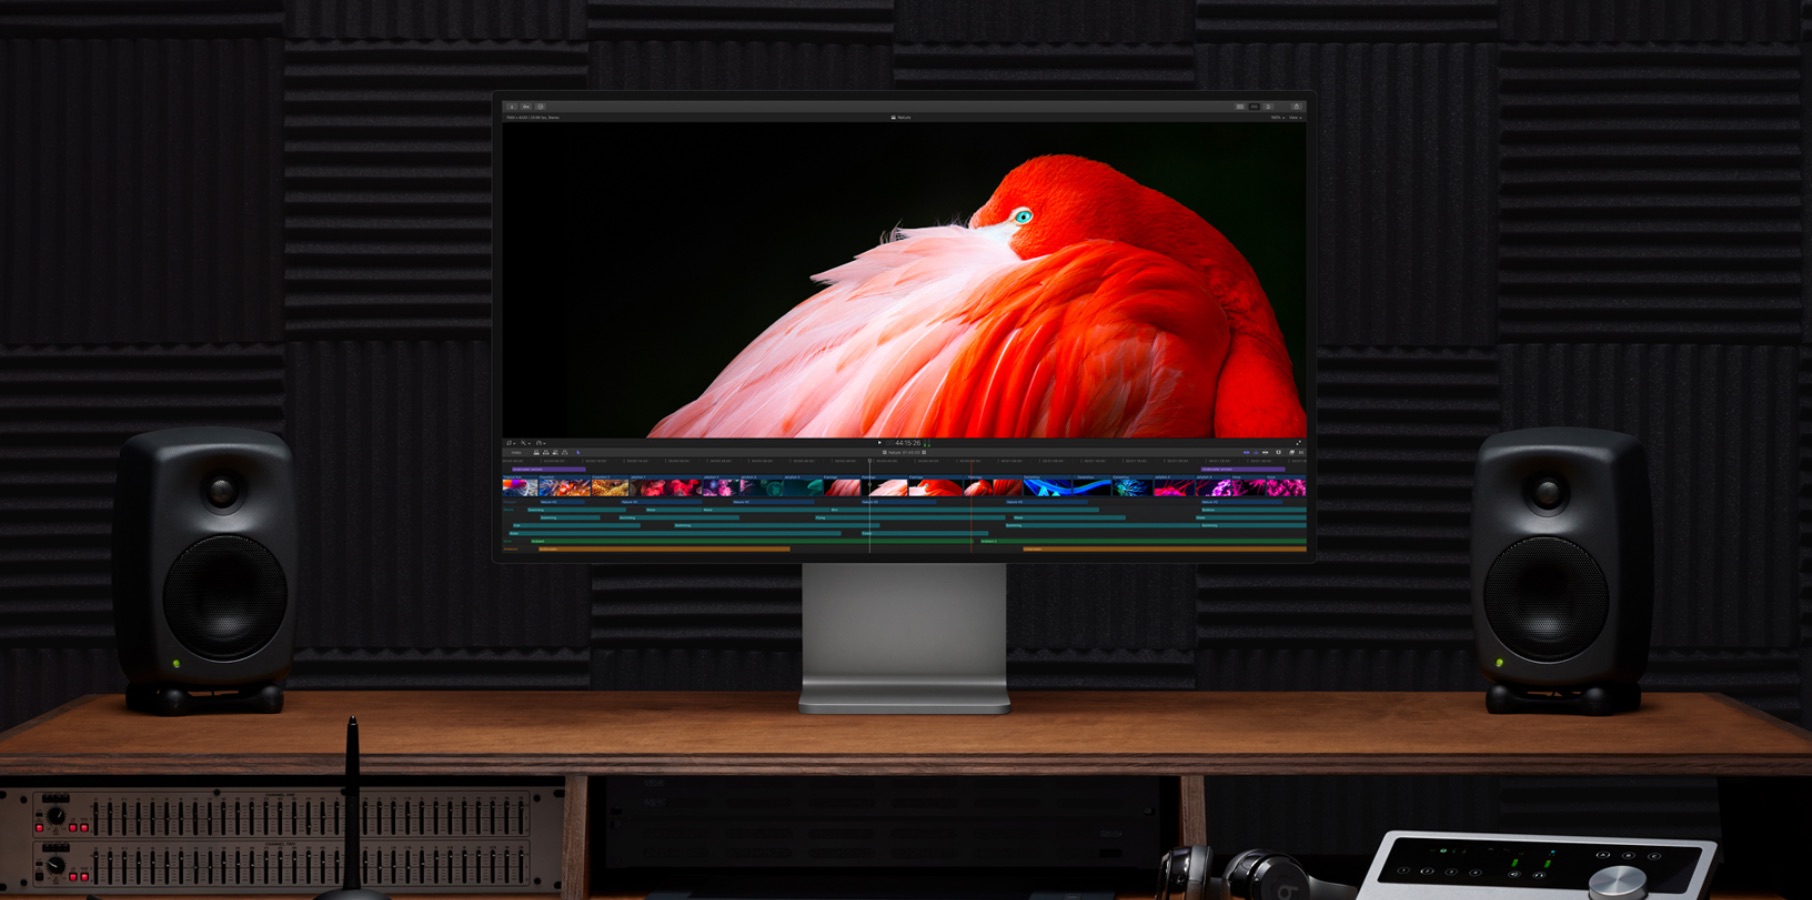 Mac Pro and the new Pro Display XDR